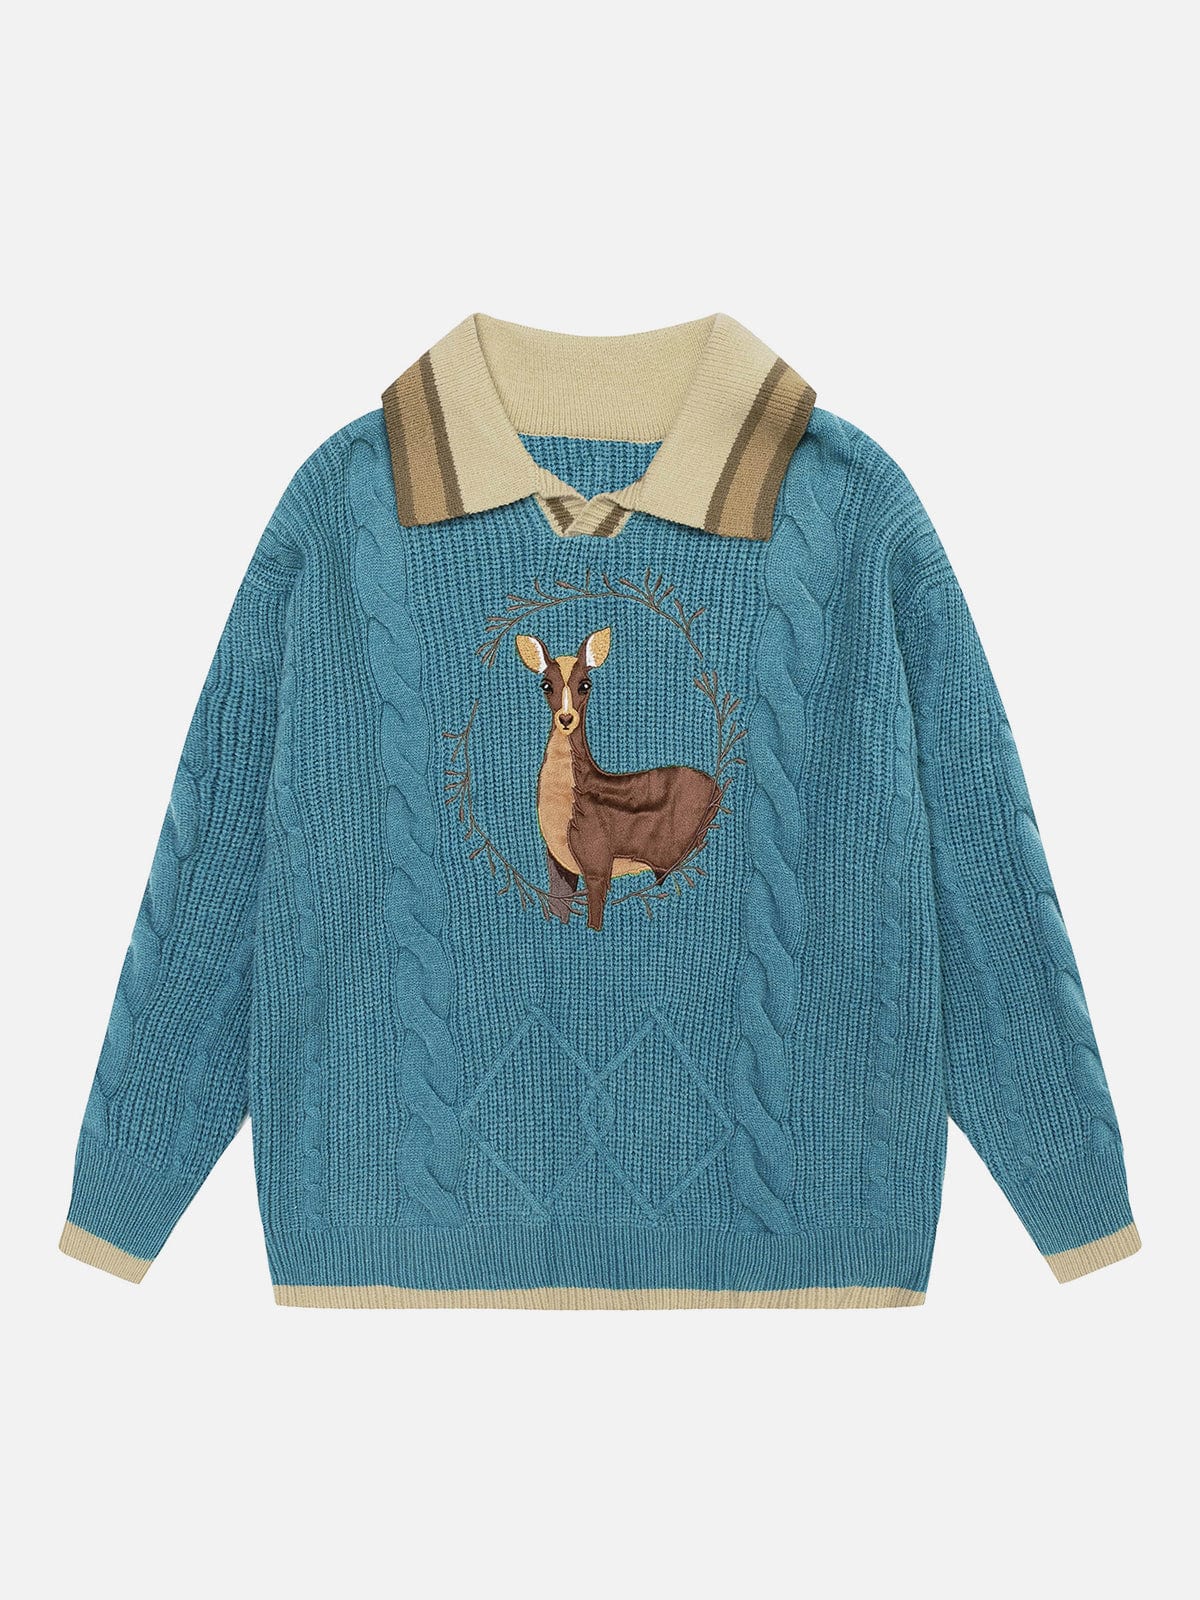 Elk Graphic Cable Knit Polo Sweater